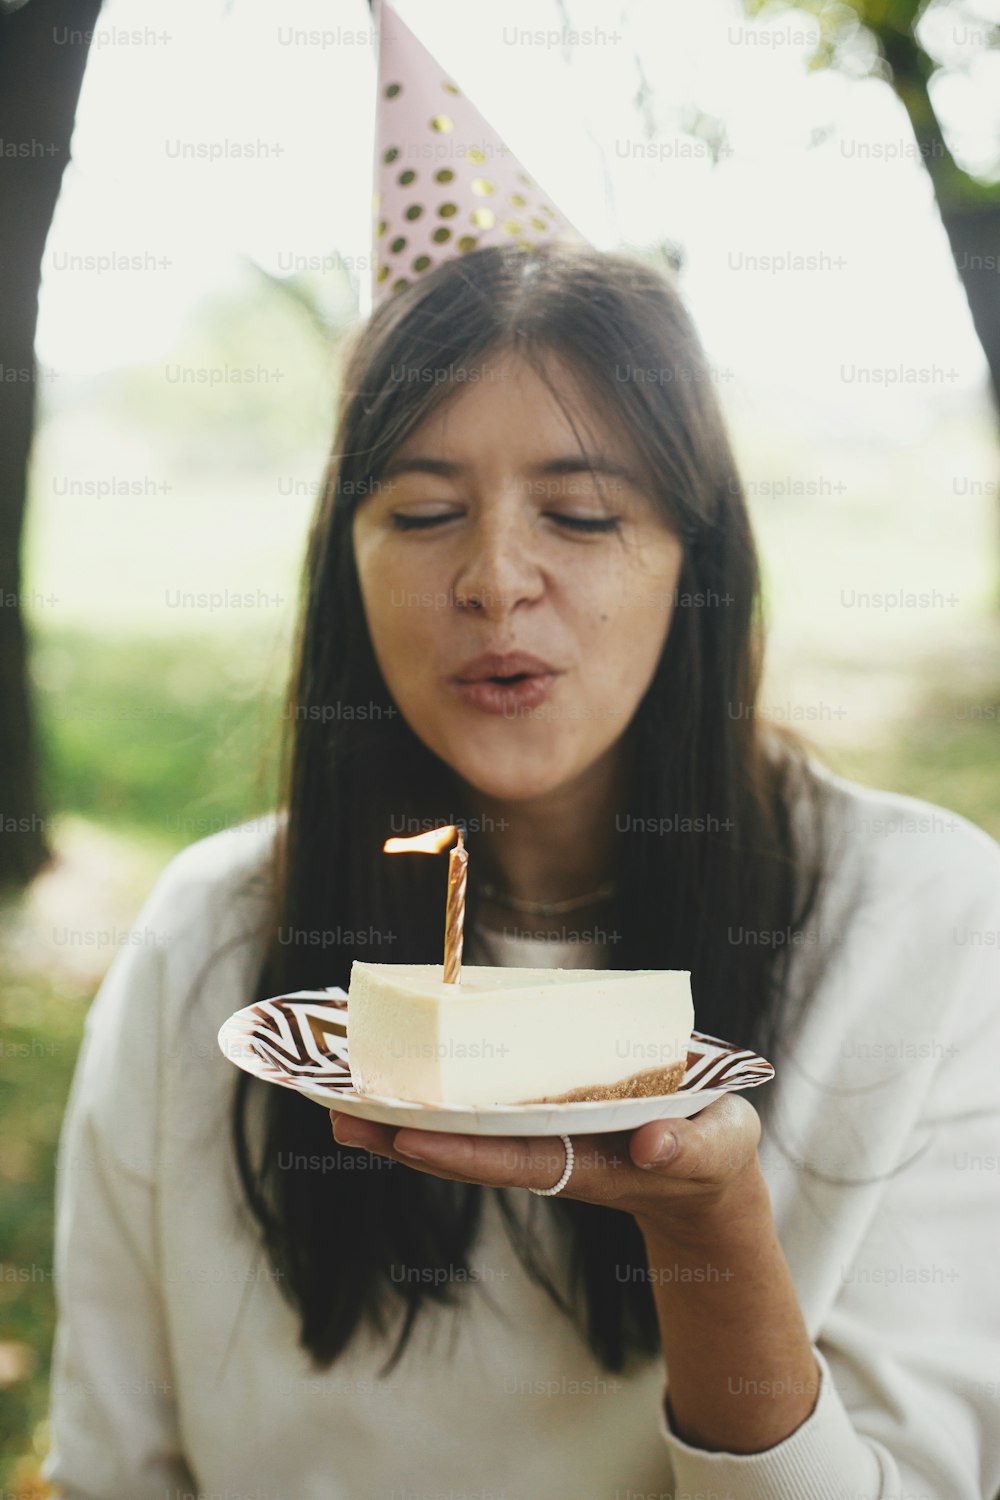 Stylish happy woman in party hat blowing candle on piece of birthday cake and making a wish. Celebrating birthday at picnic party outdoor.